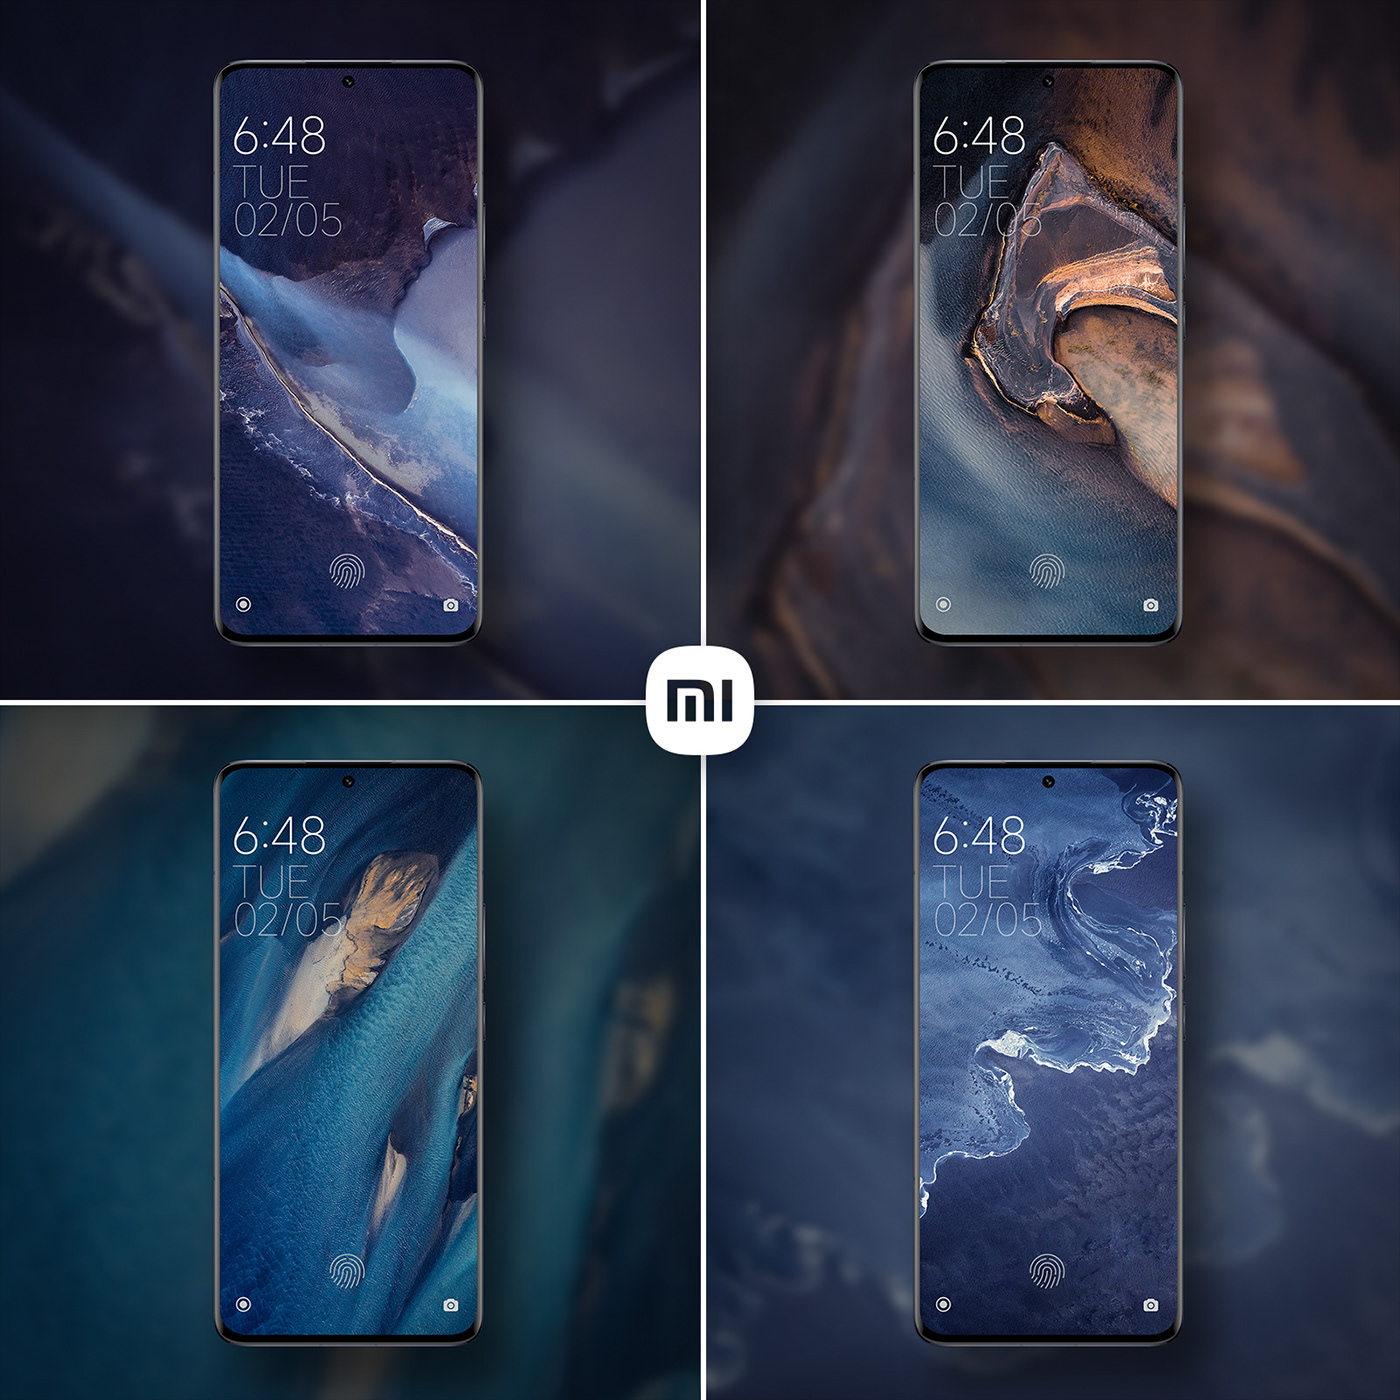 wallpaper Wallpapers smartphone interface design abstract landscape photography Aerial Photography xiaomi mobile